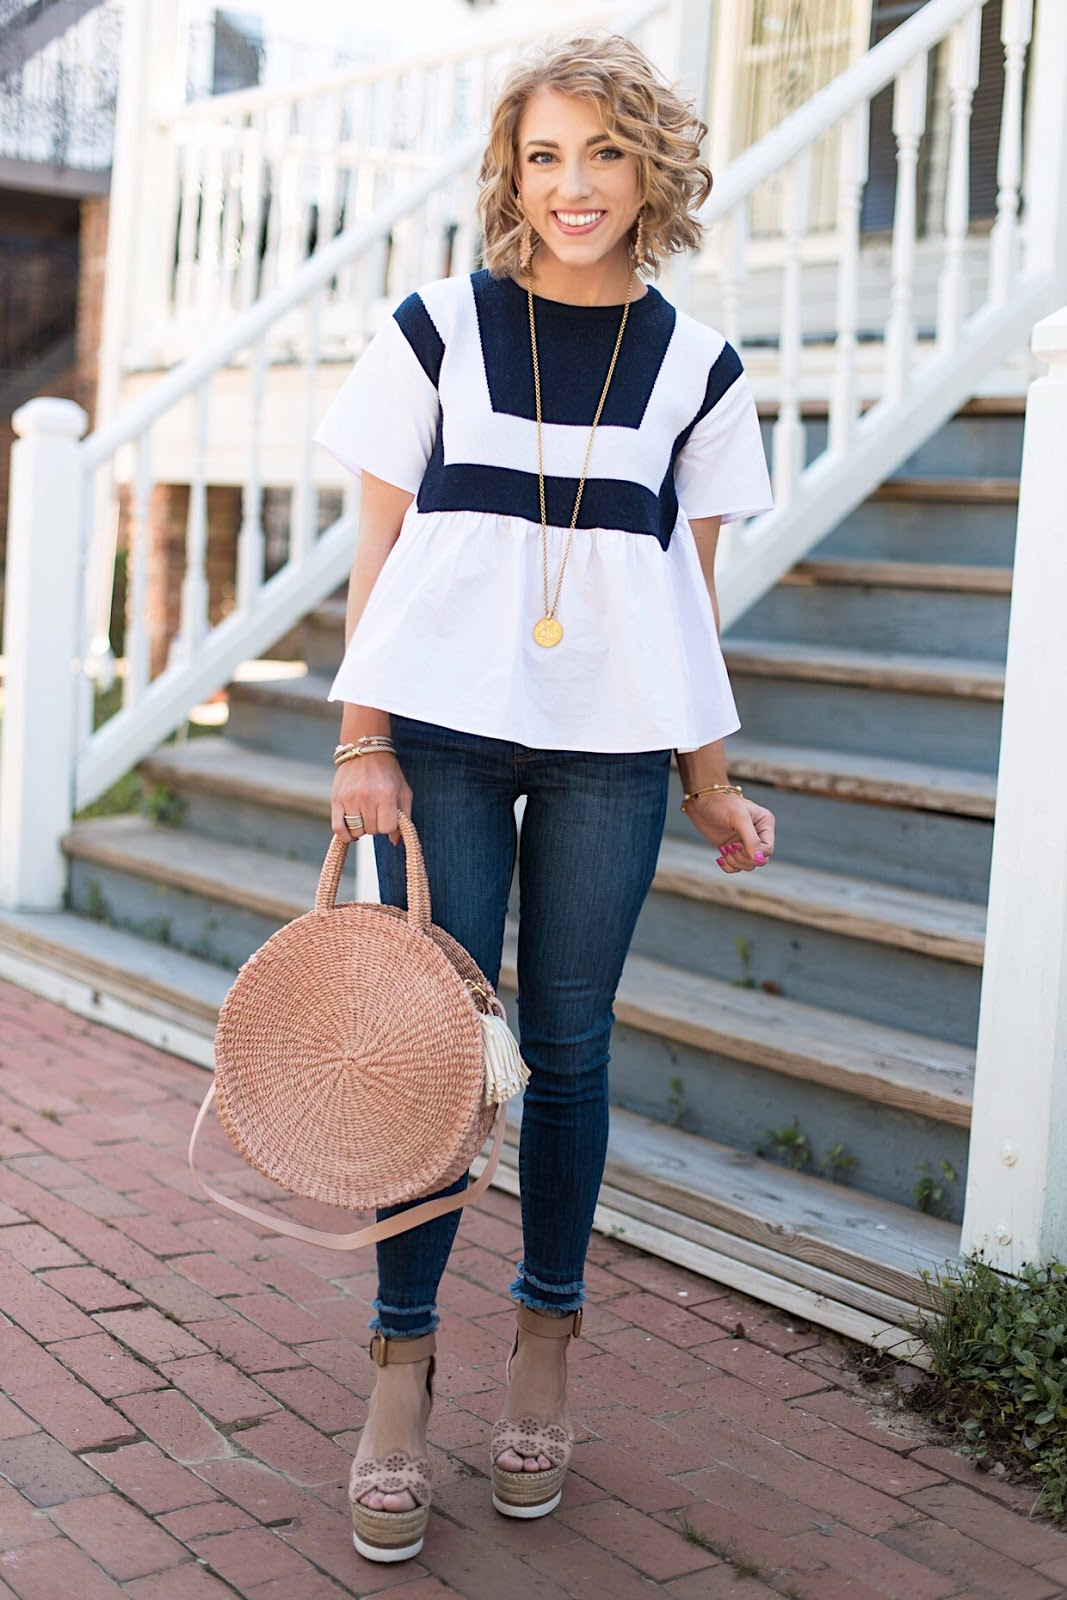 English Factory Navy and White Tanner Knit Top + Clare V. Alice Bag in Blush - Something Delightful Blog